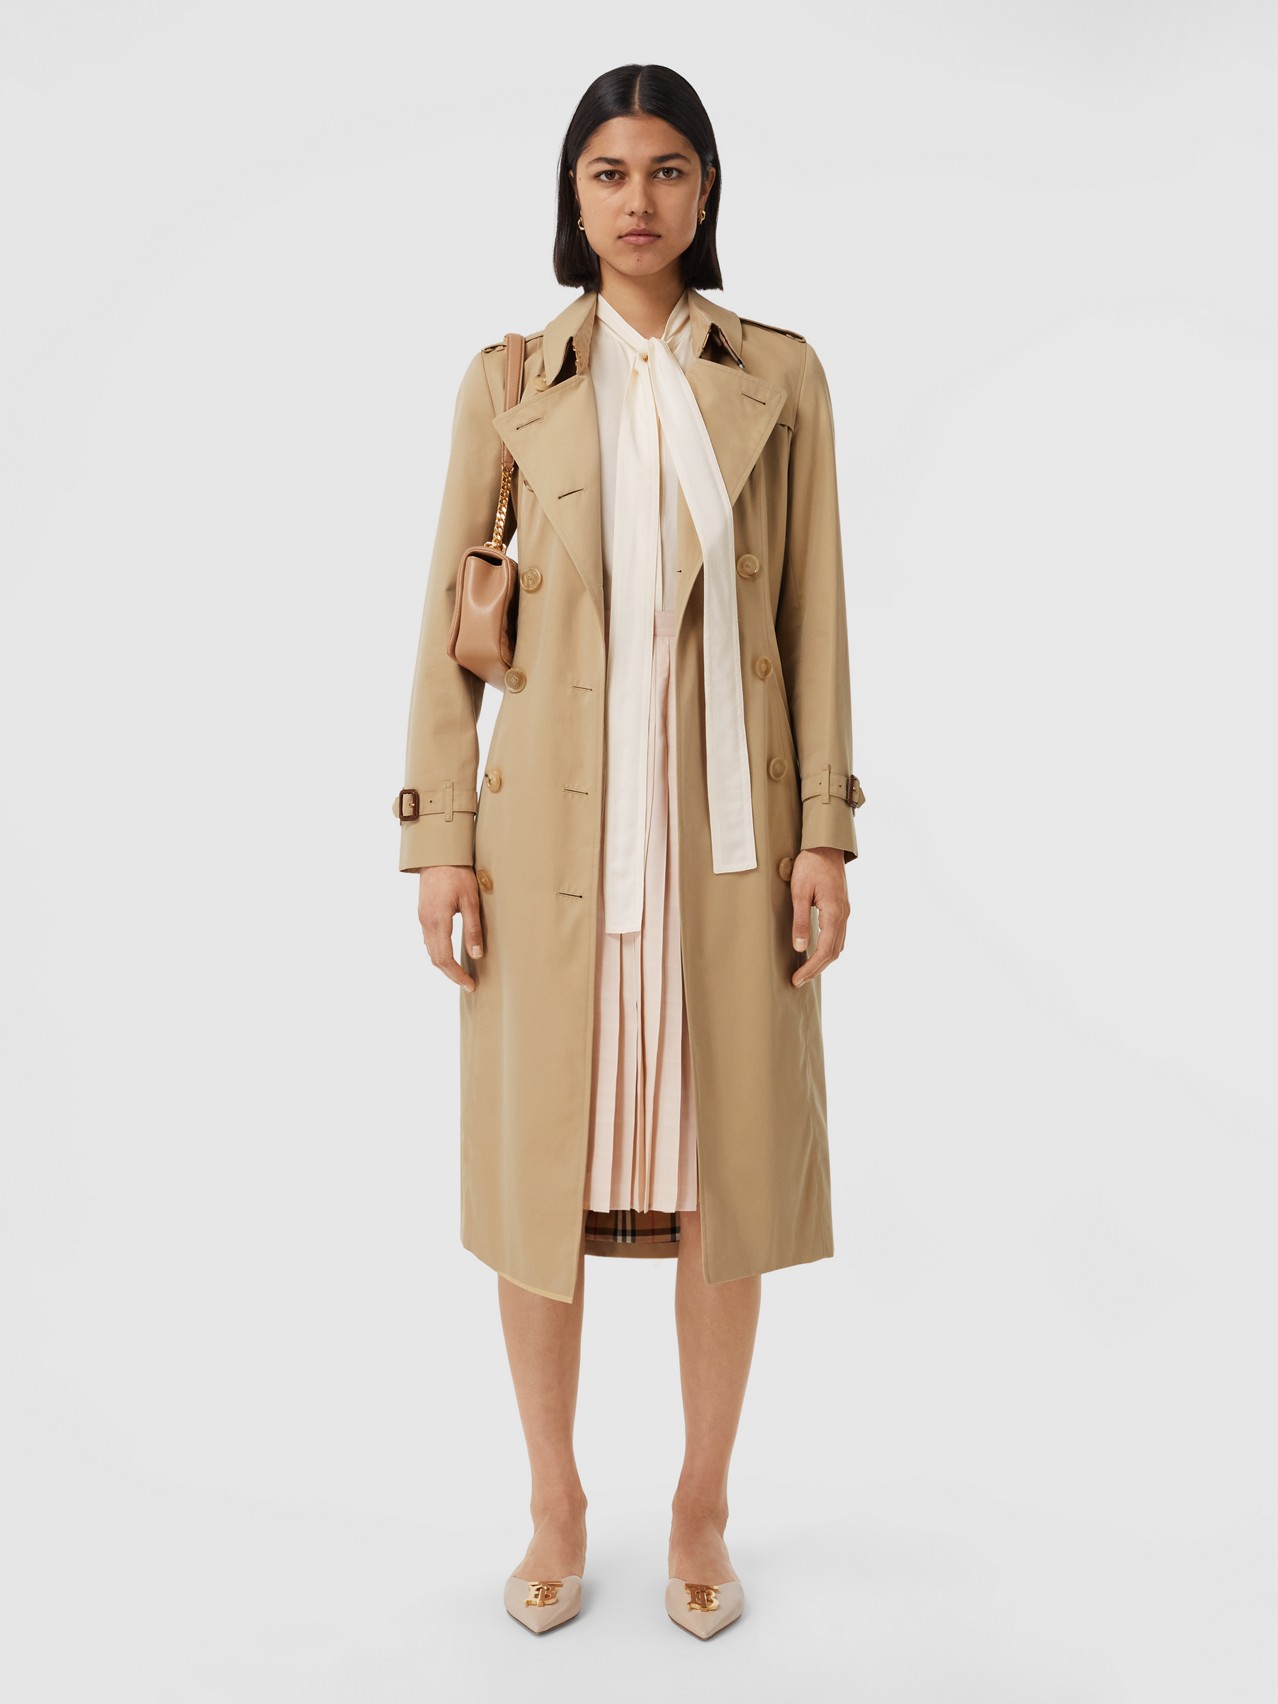 The Long Chelsea Heritage Trench Coat by Burberry, available on burberry.com for $1650 Gigi Hadid Outerwear SIMILAR PRODUCT